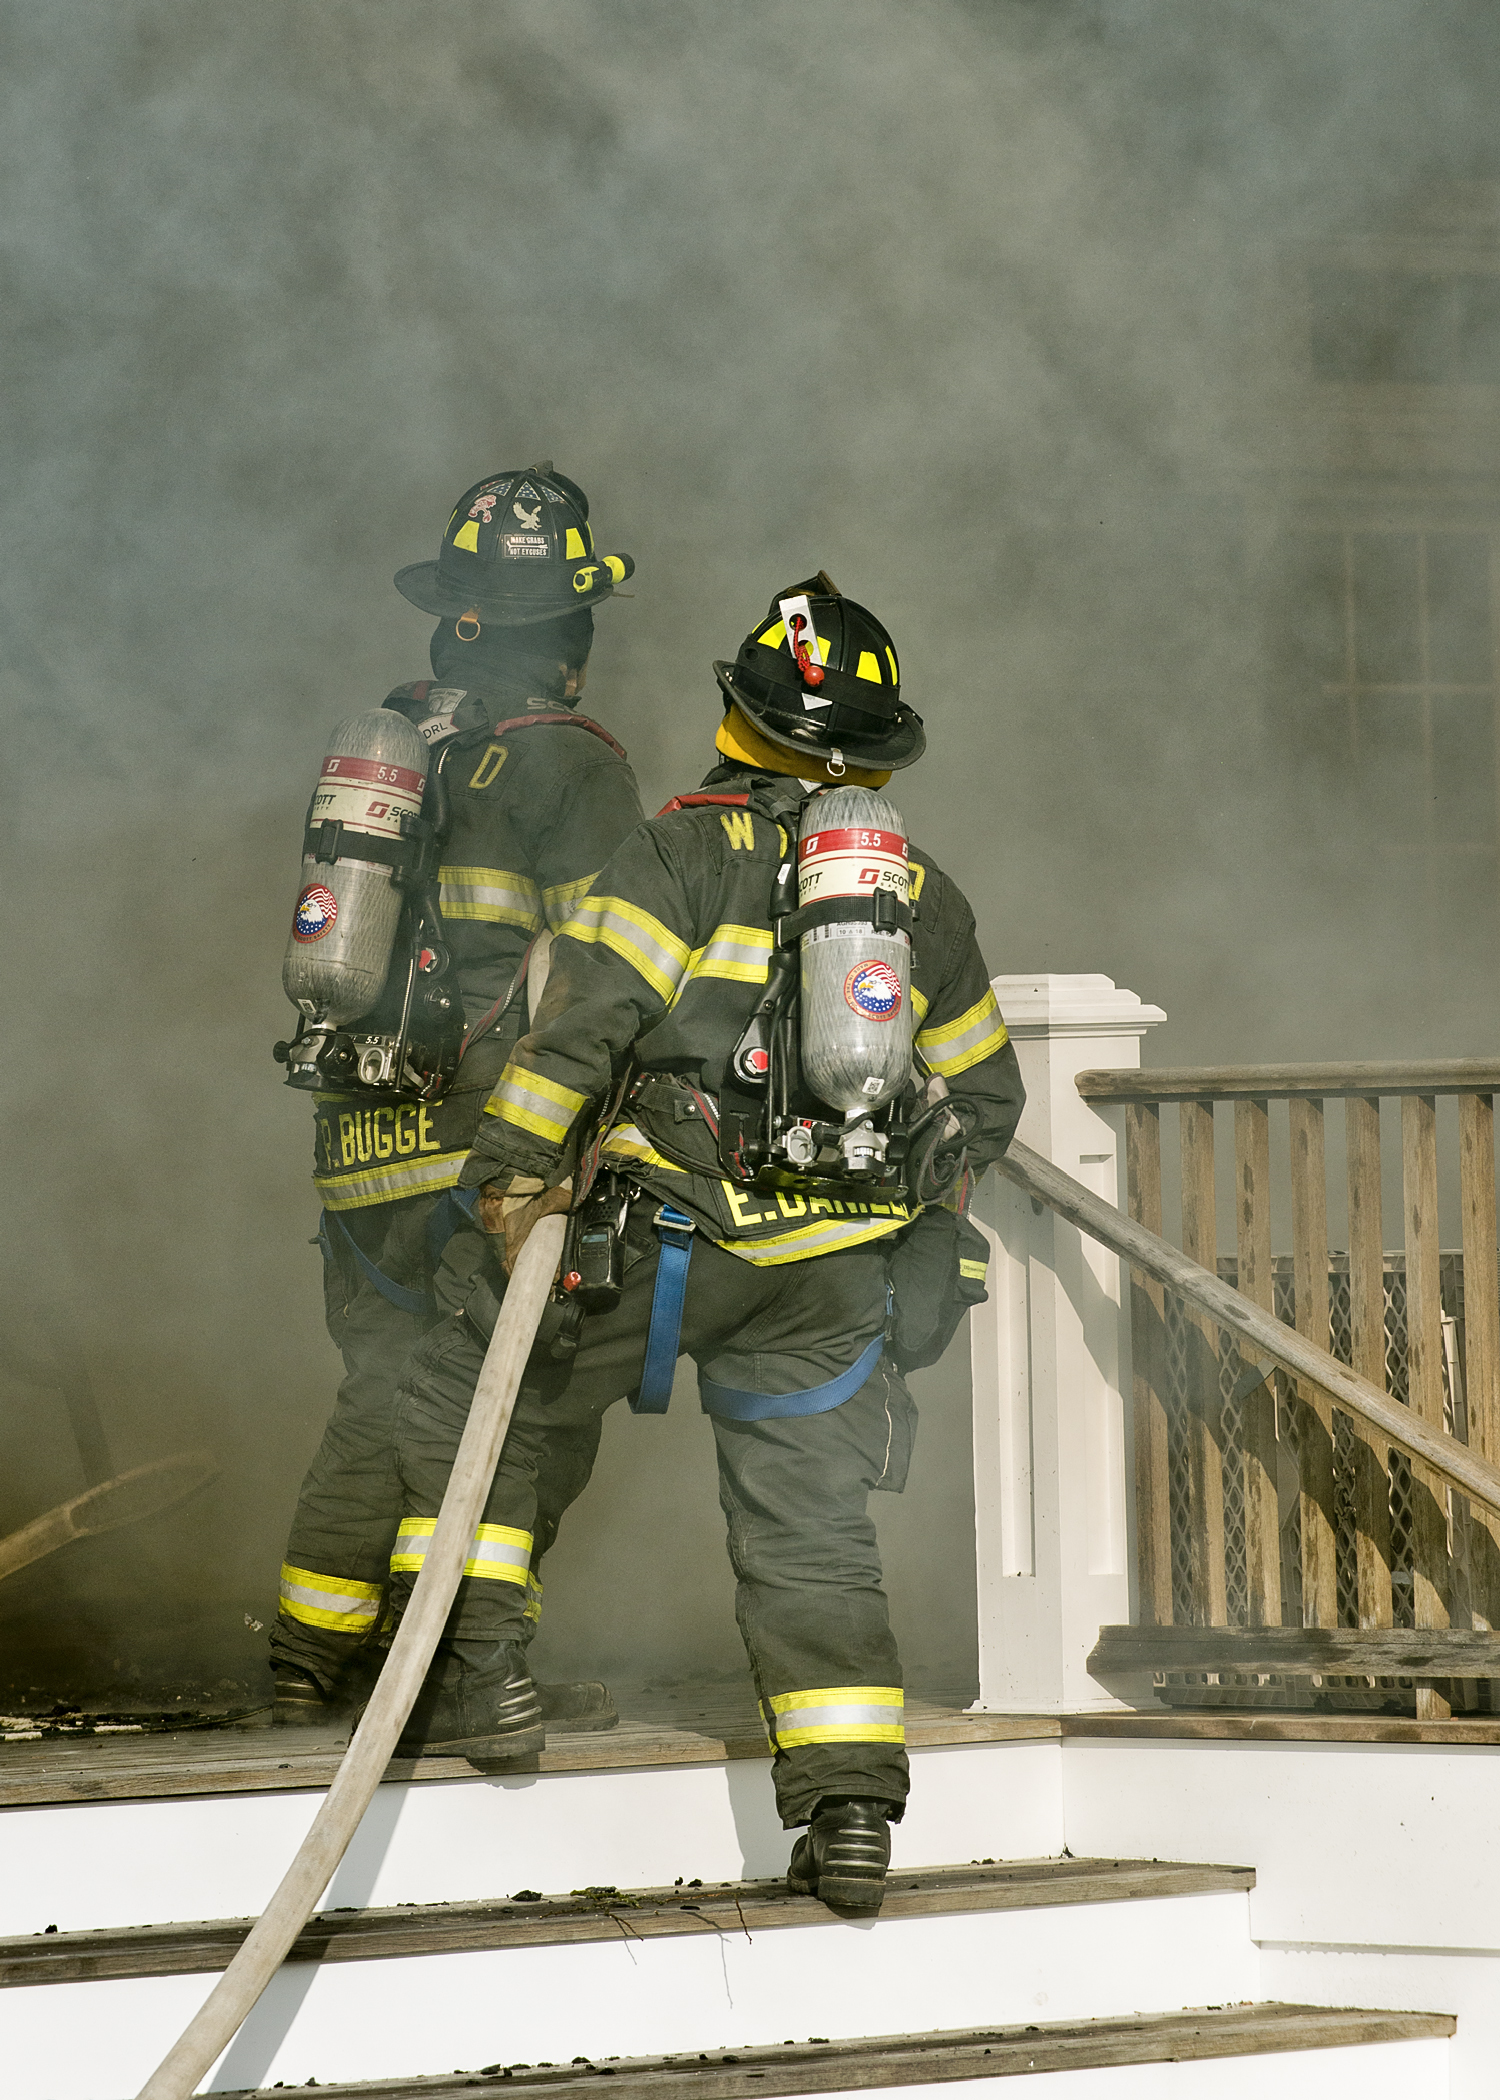 Firefighters atttacking the flames at a home on Michaels Way in Westhampton Beach yesterday afternoon.